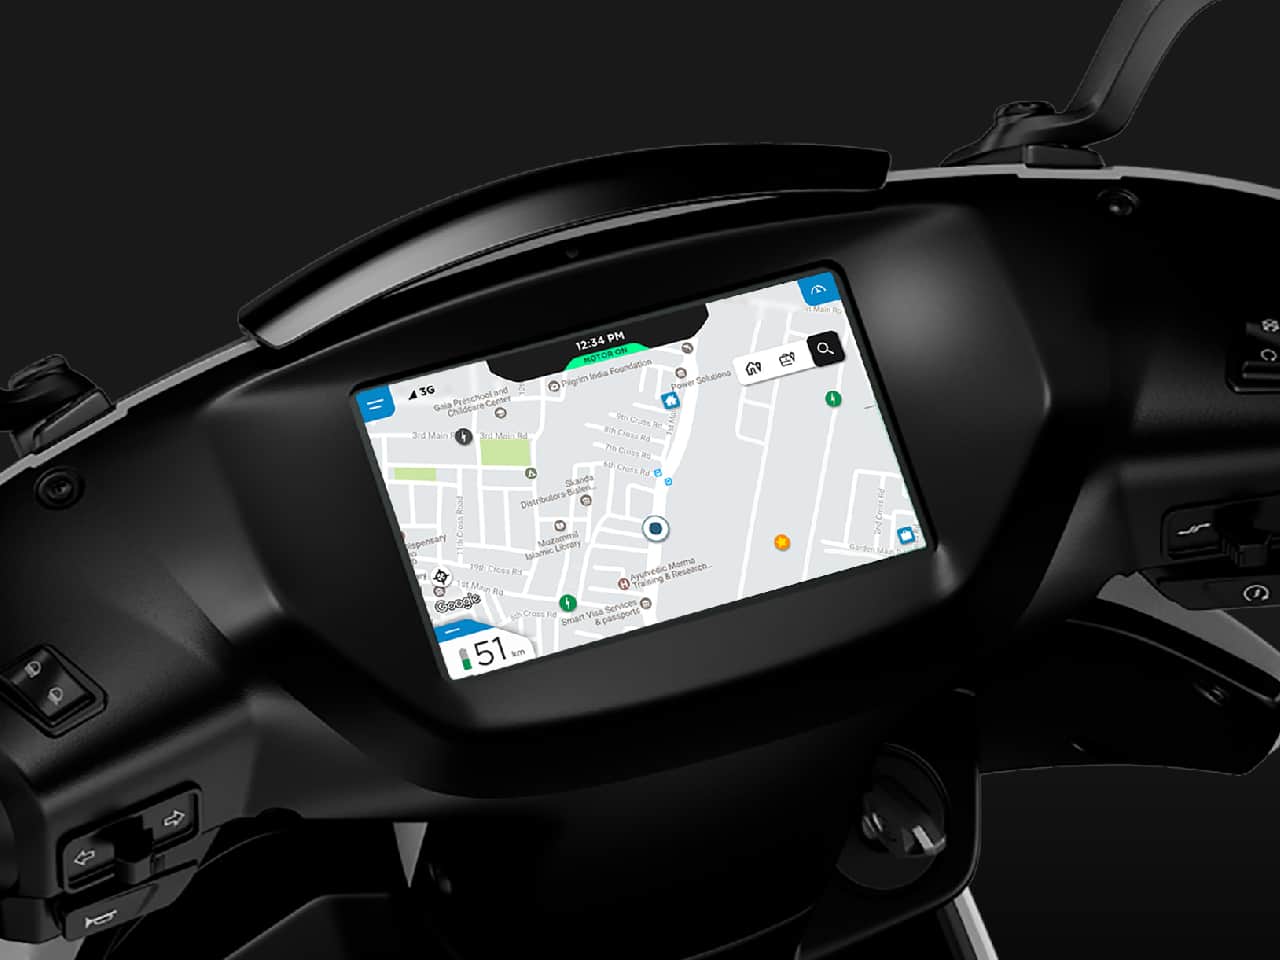 The navigation map display on Ather's scooter